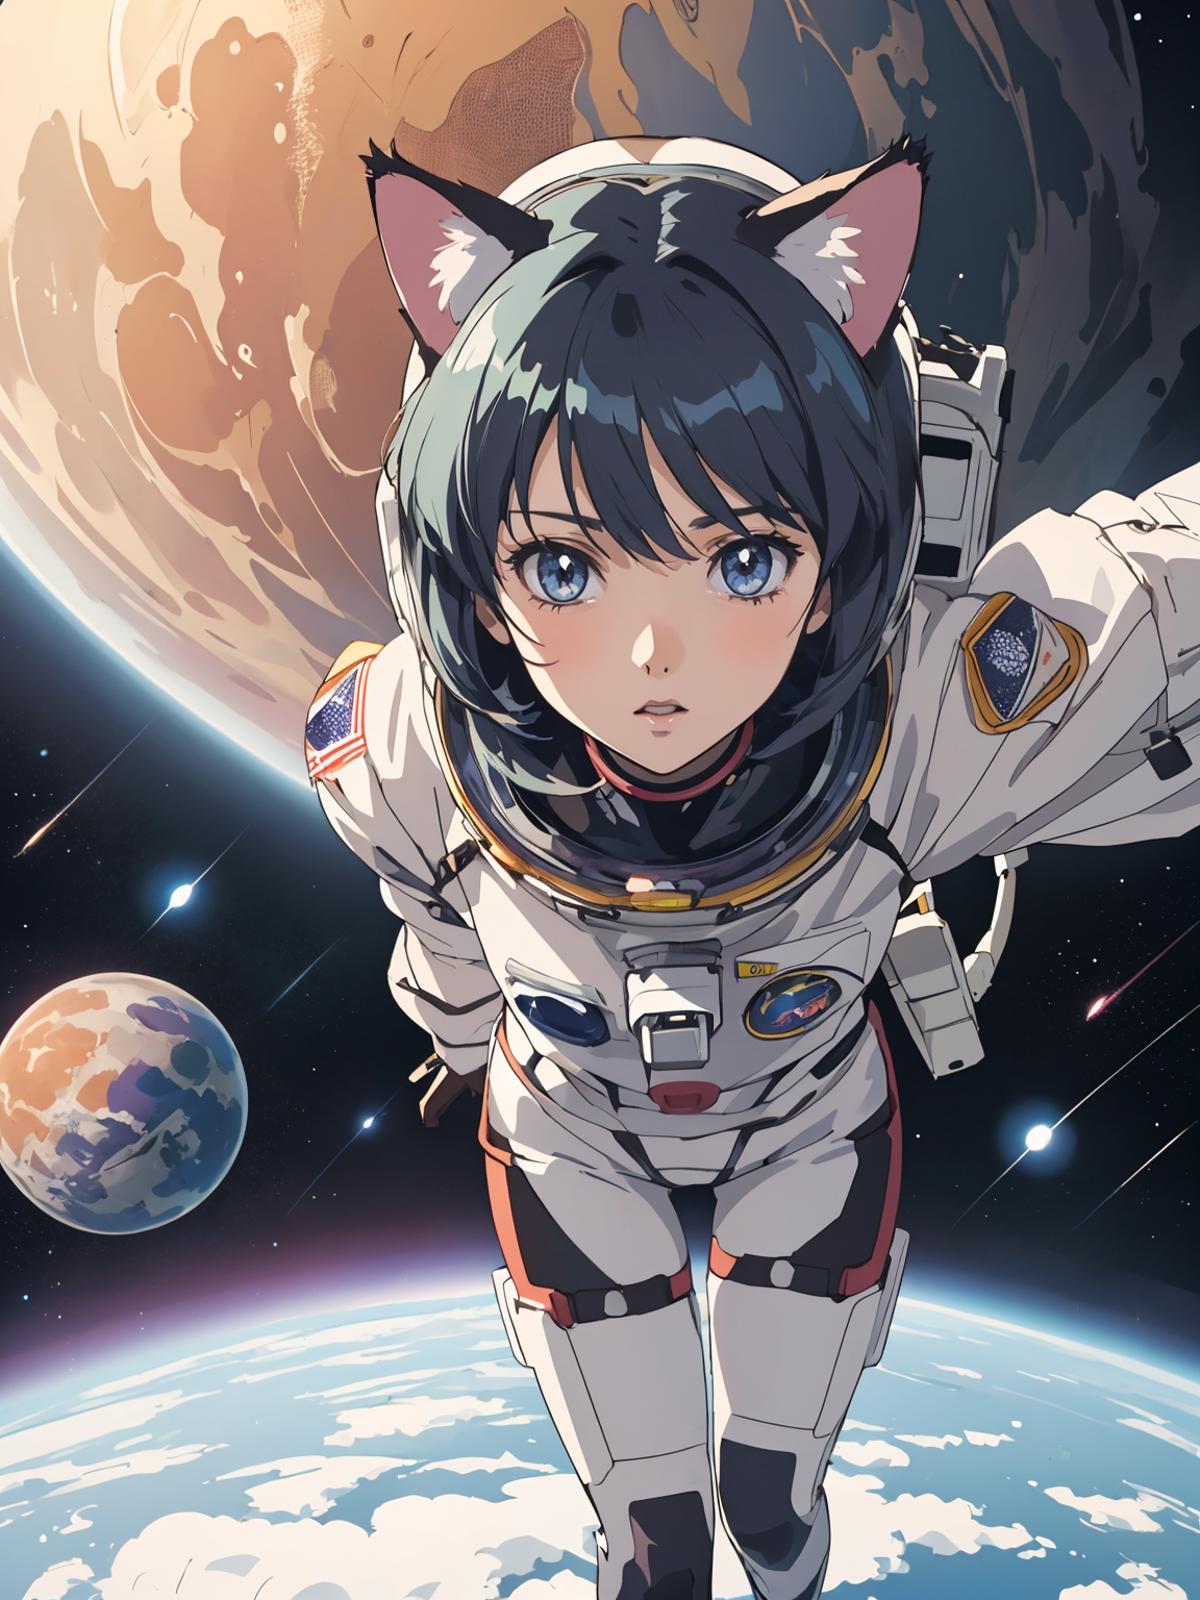 Anime girl in a white space suit with a blue helmet and blue eyes.